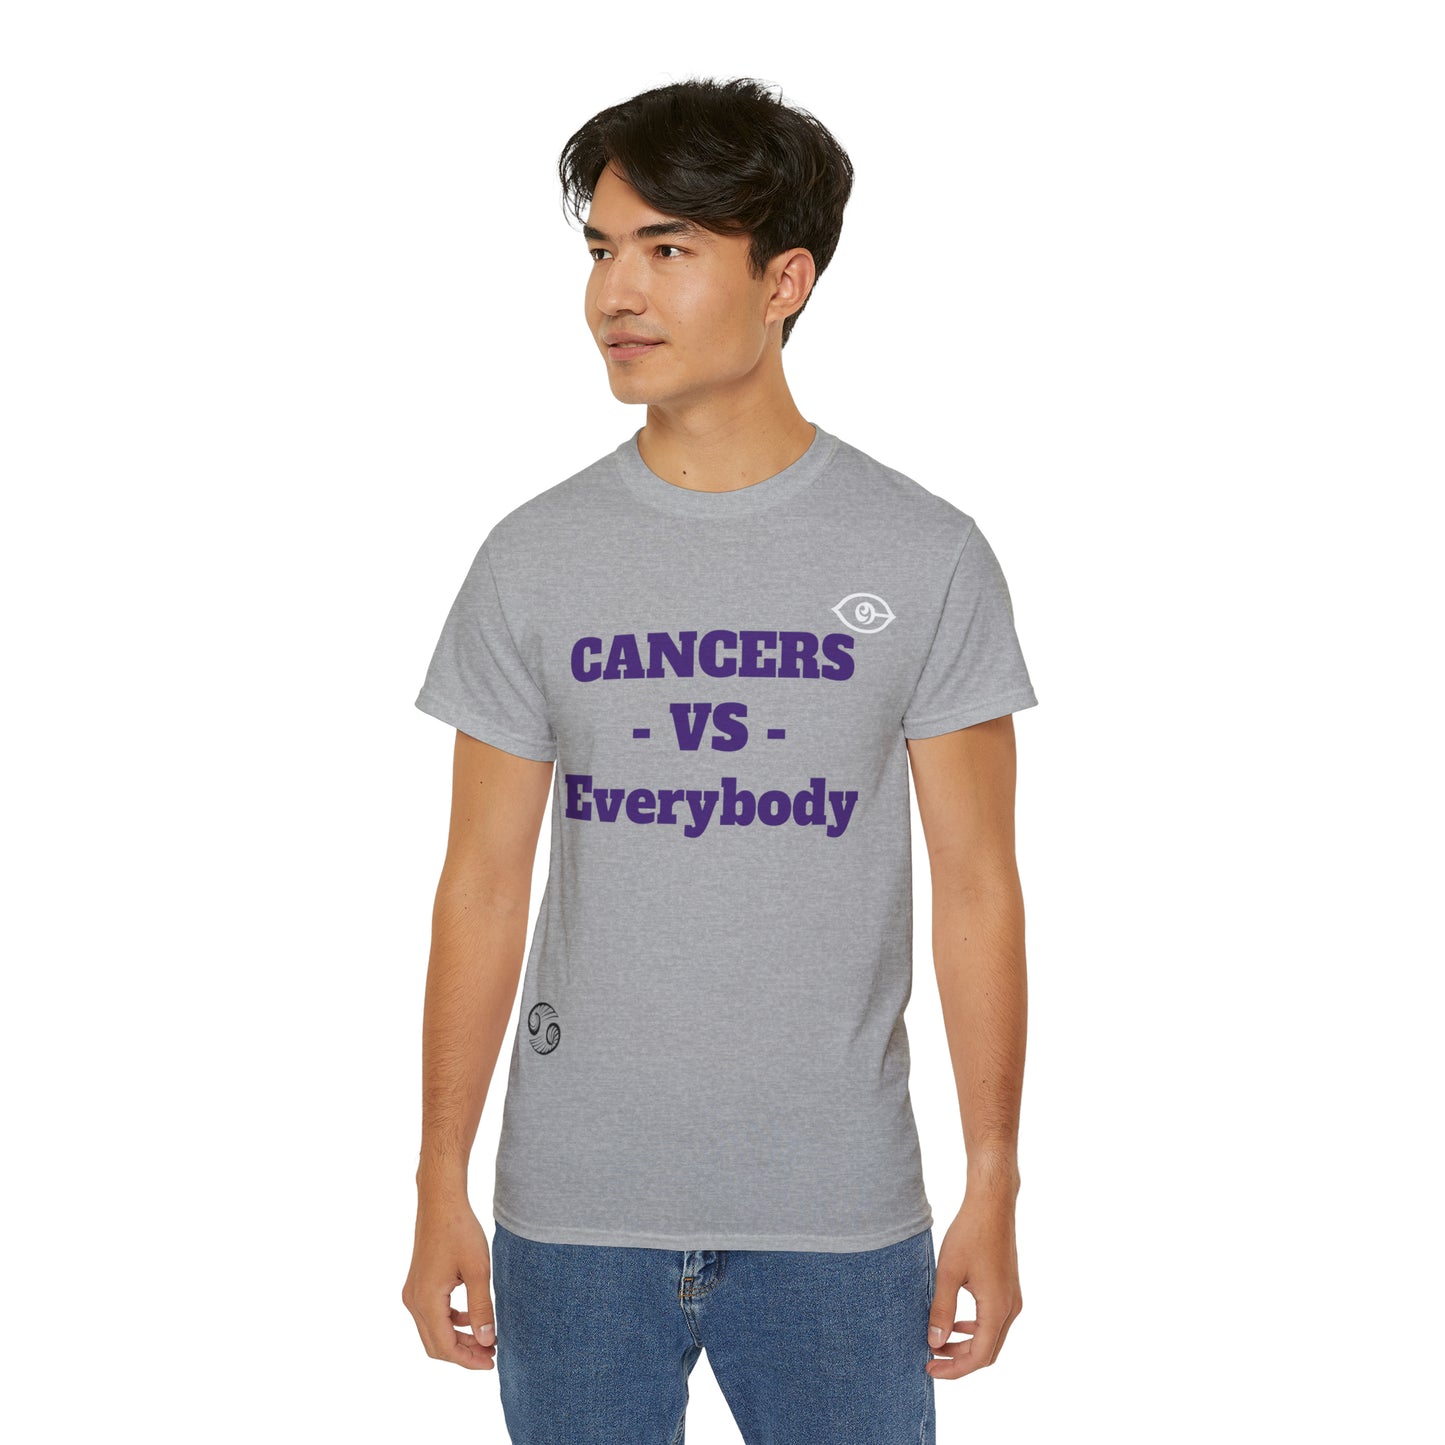 CyVision CANCERS -VS- Everybody Unisex Ultra Cotton Tee